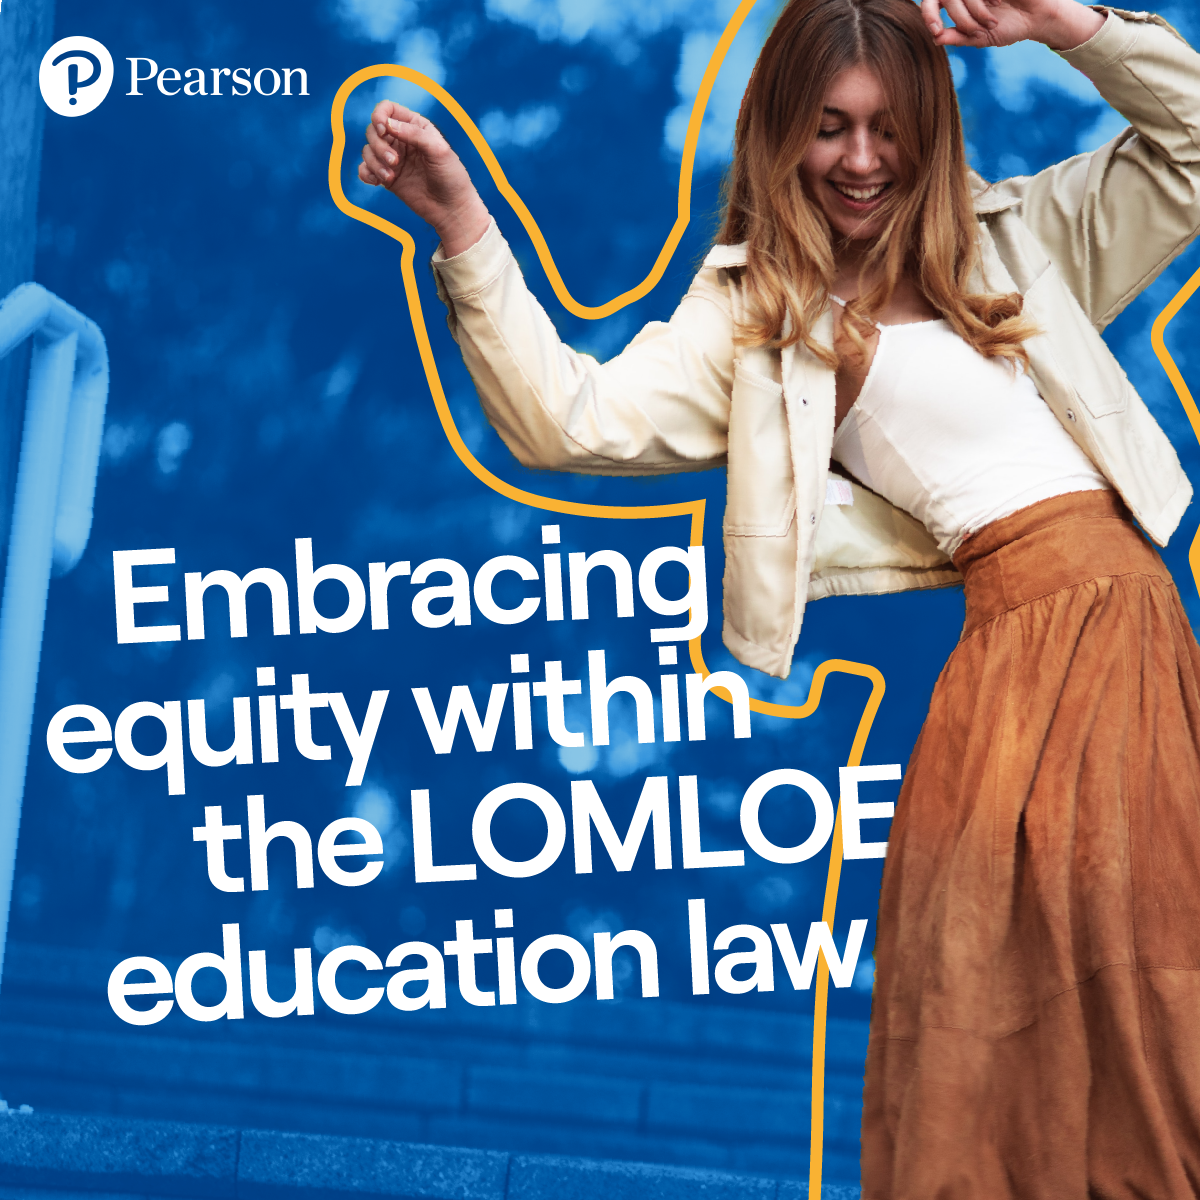 Embracing equity within the LOMLOE education law